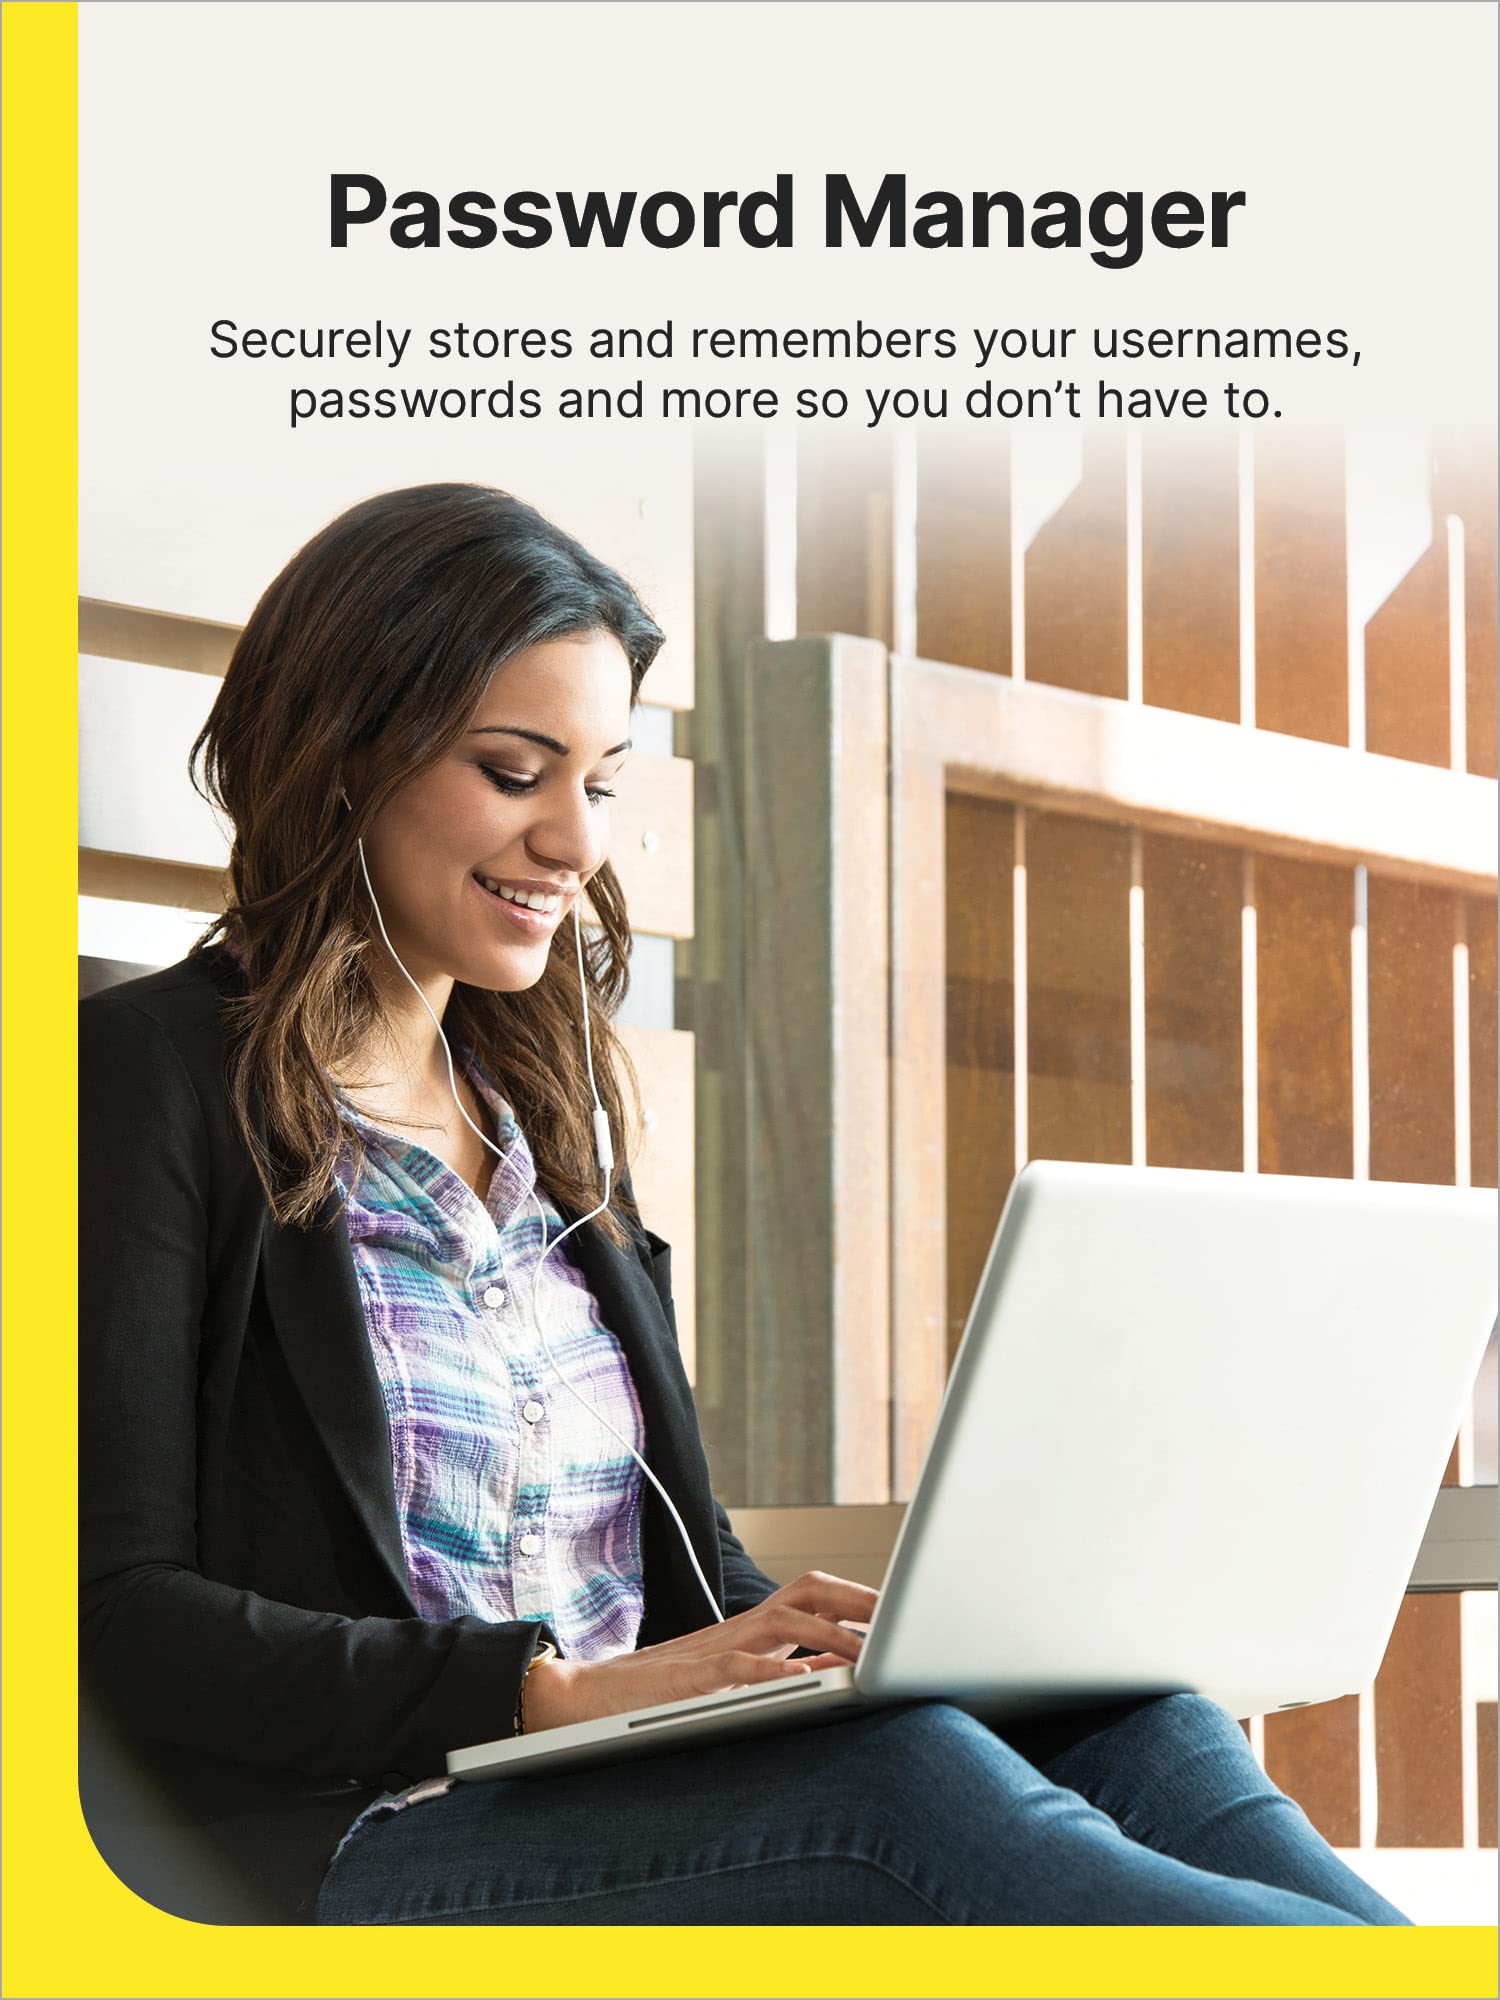 Norton 360 for Amazon, 2024 Ready, Antivirus software for up to 10 Devices with Auto Renewal